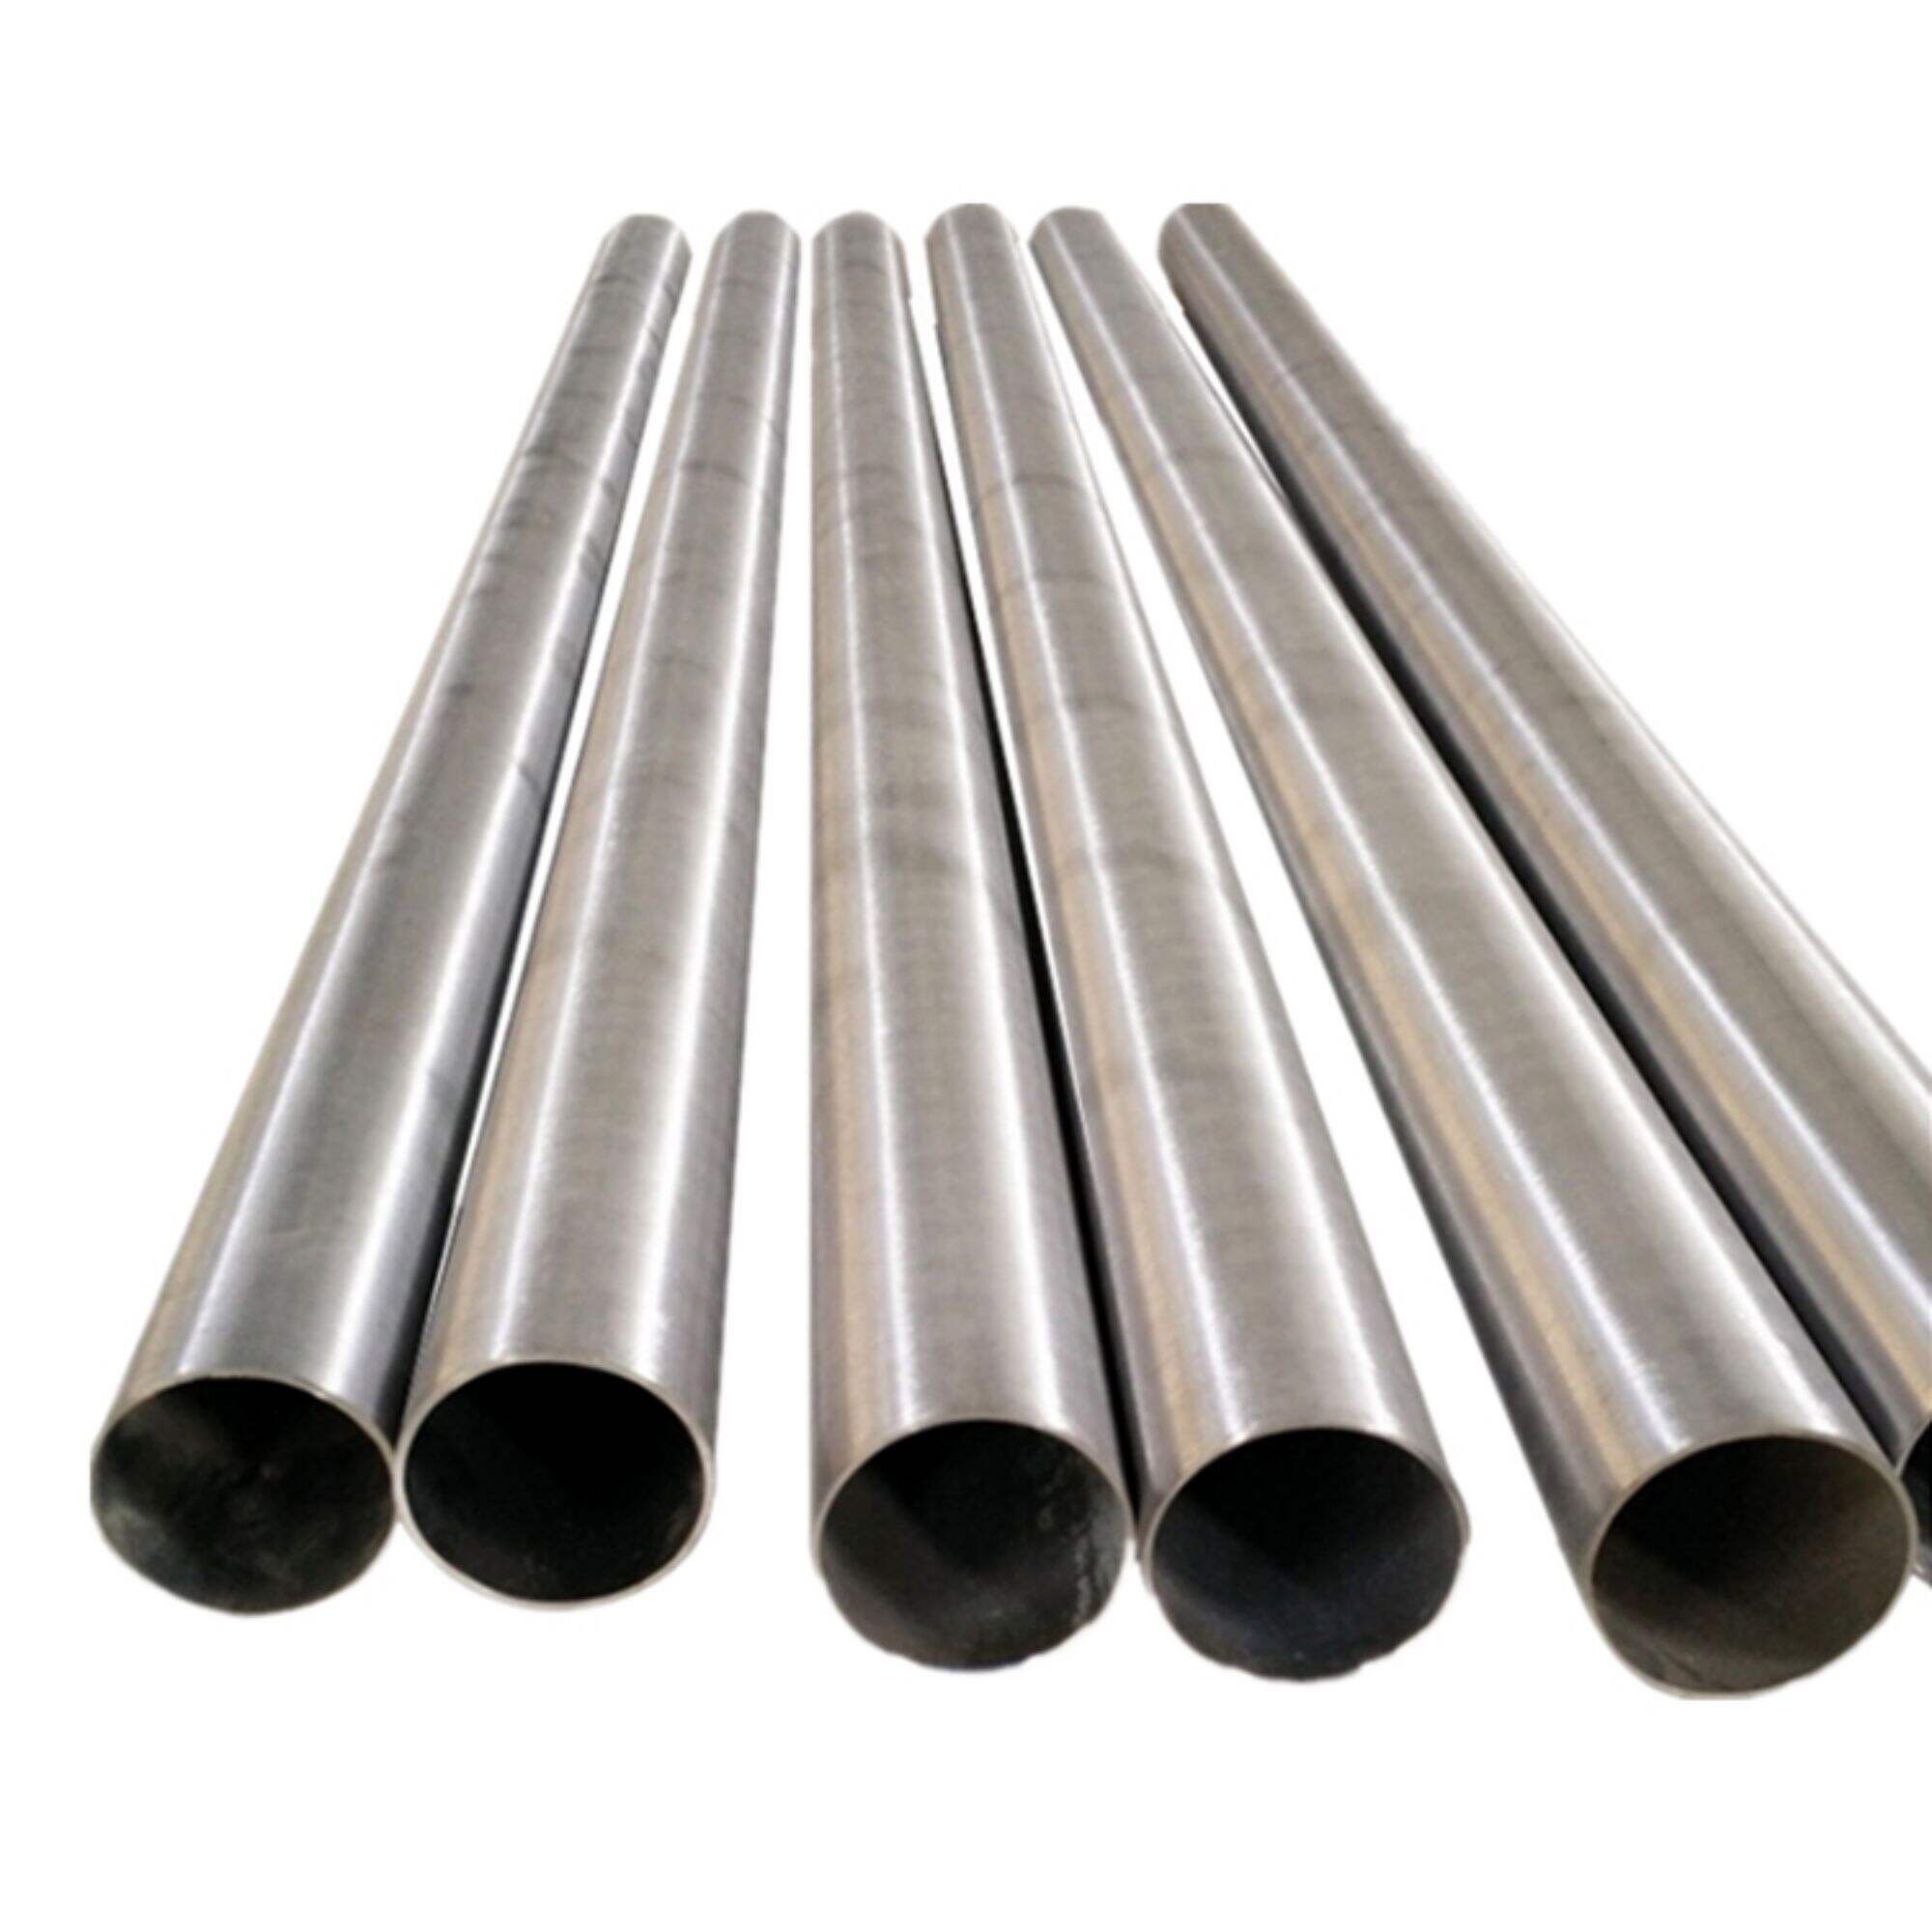 ASTM 410 420 430 sch 120 stainless steel seamless pipe